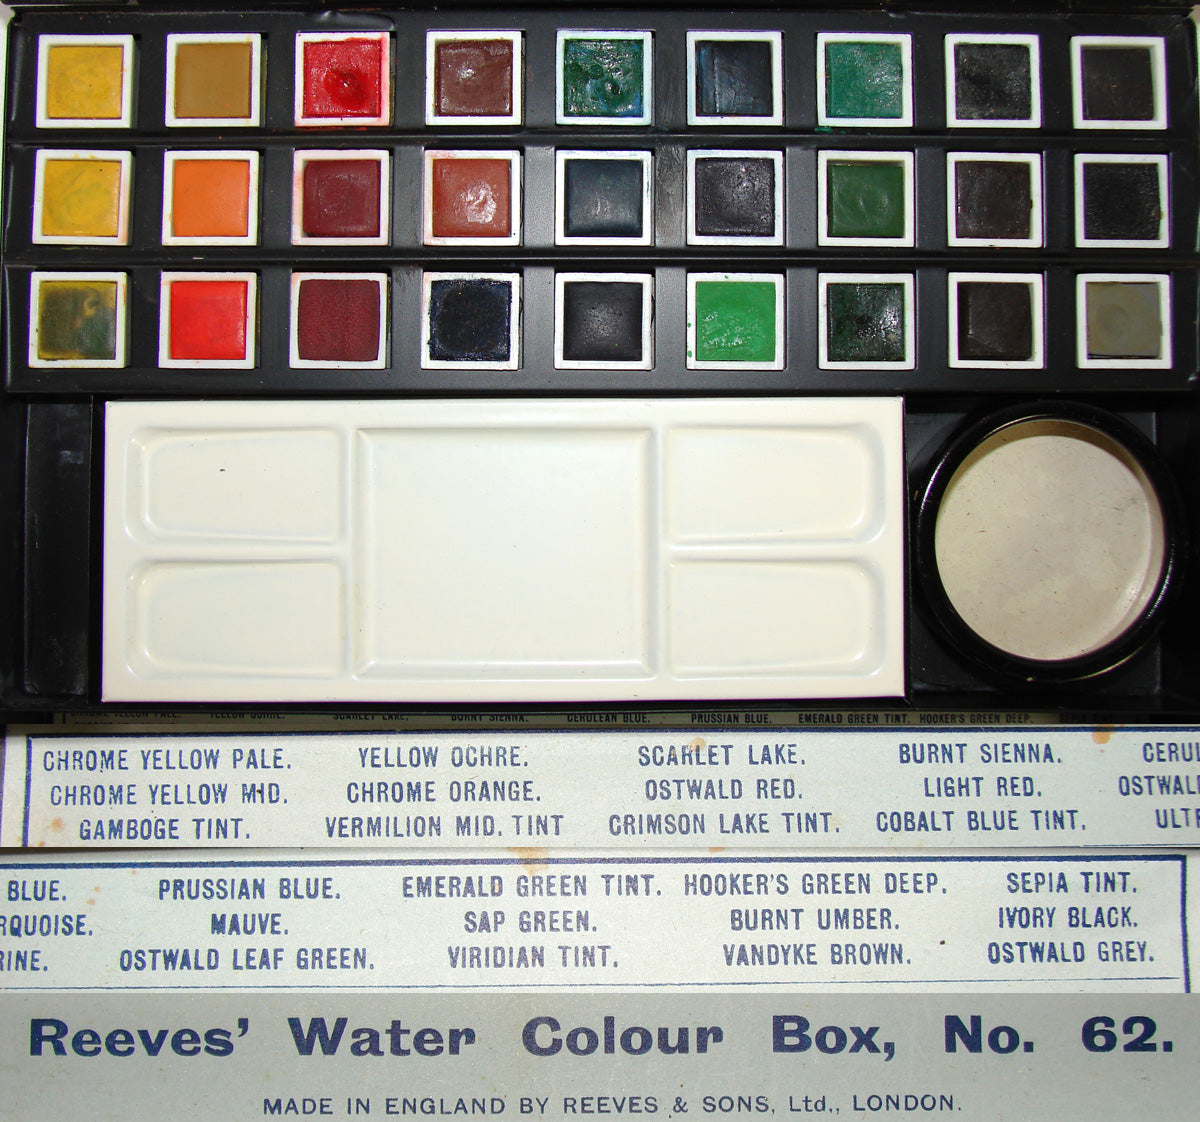 Vintage Reeves & Sons Artist's or Painter's Box, Many Watercolor Paints